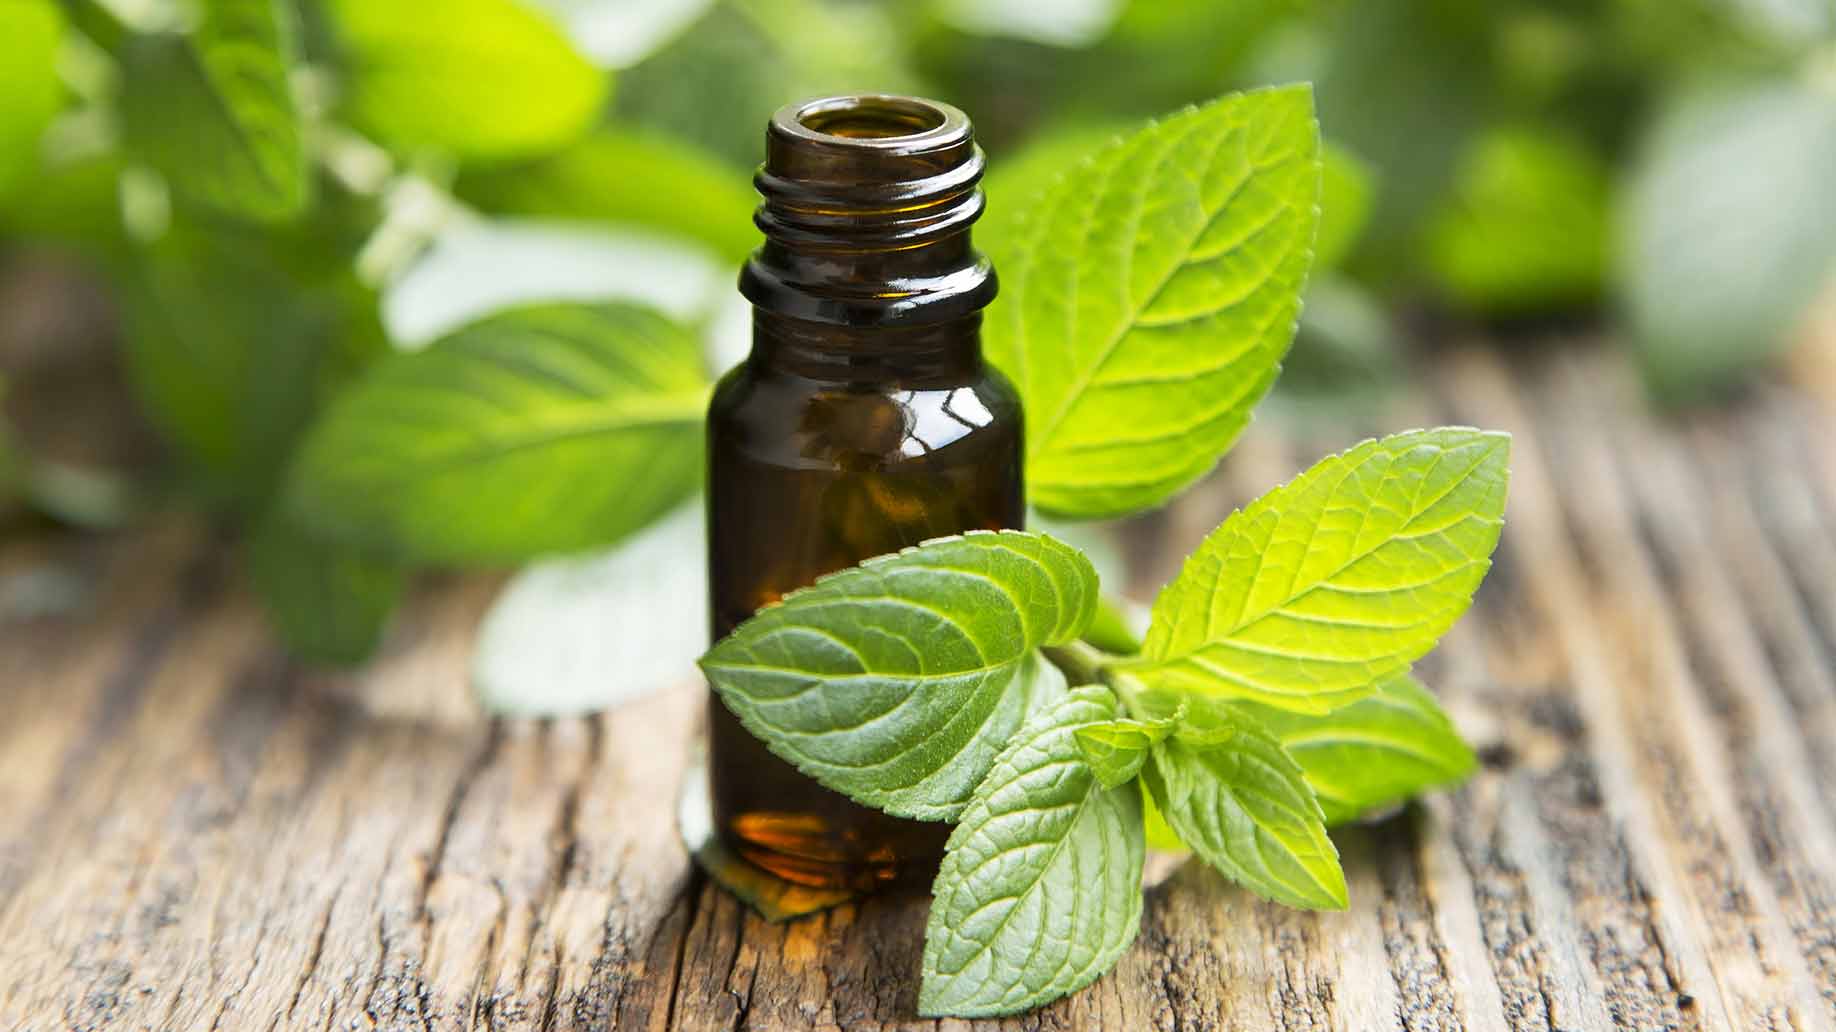 peppermint essential oil natural health benefits indigestion ibs hair growth